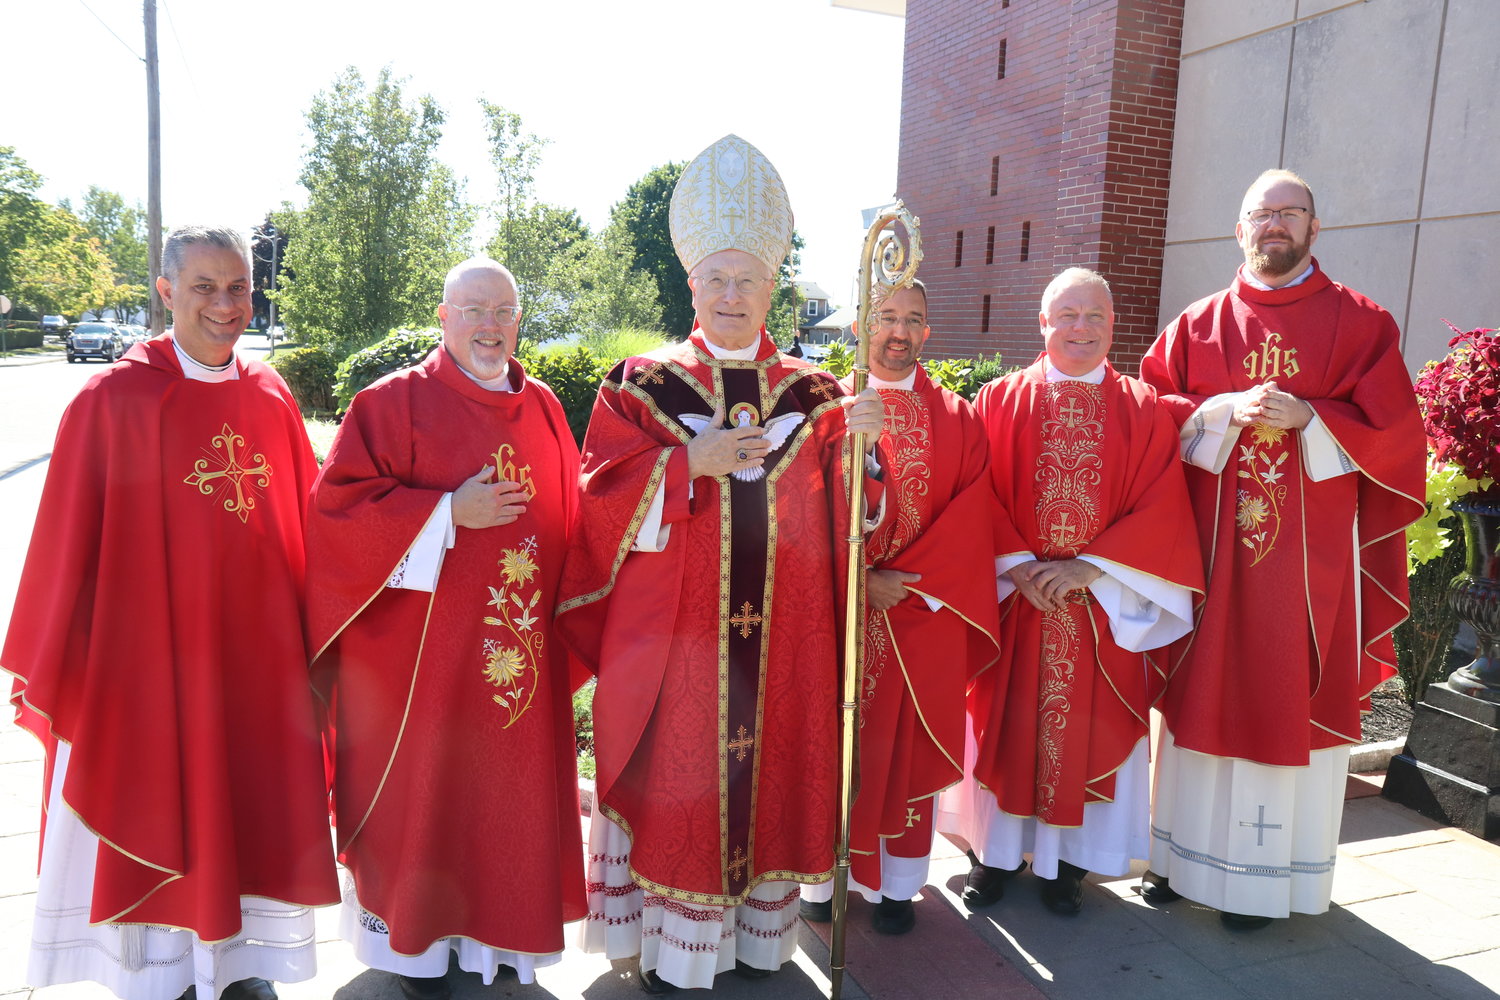 Pictured from left, Father David Procaccini, Father Bernard Healey, Bishop Evans, Father Carl Fisette, Father David Gaffney and Father Daniel Mahoney at OLM Friday.